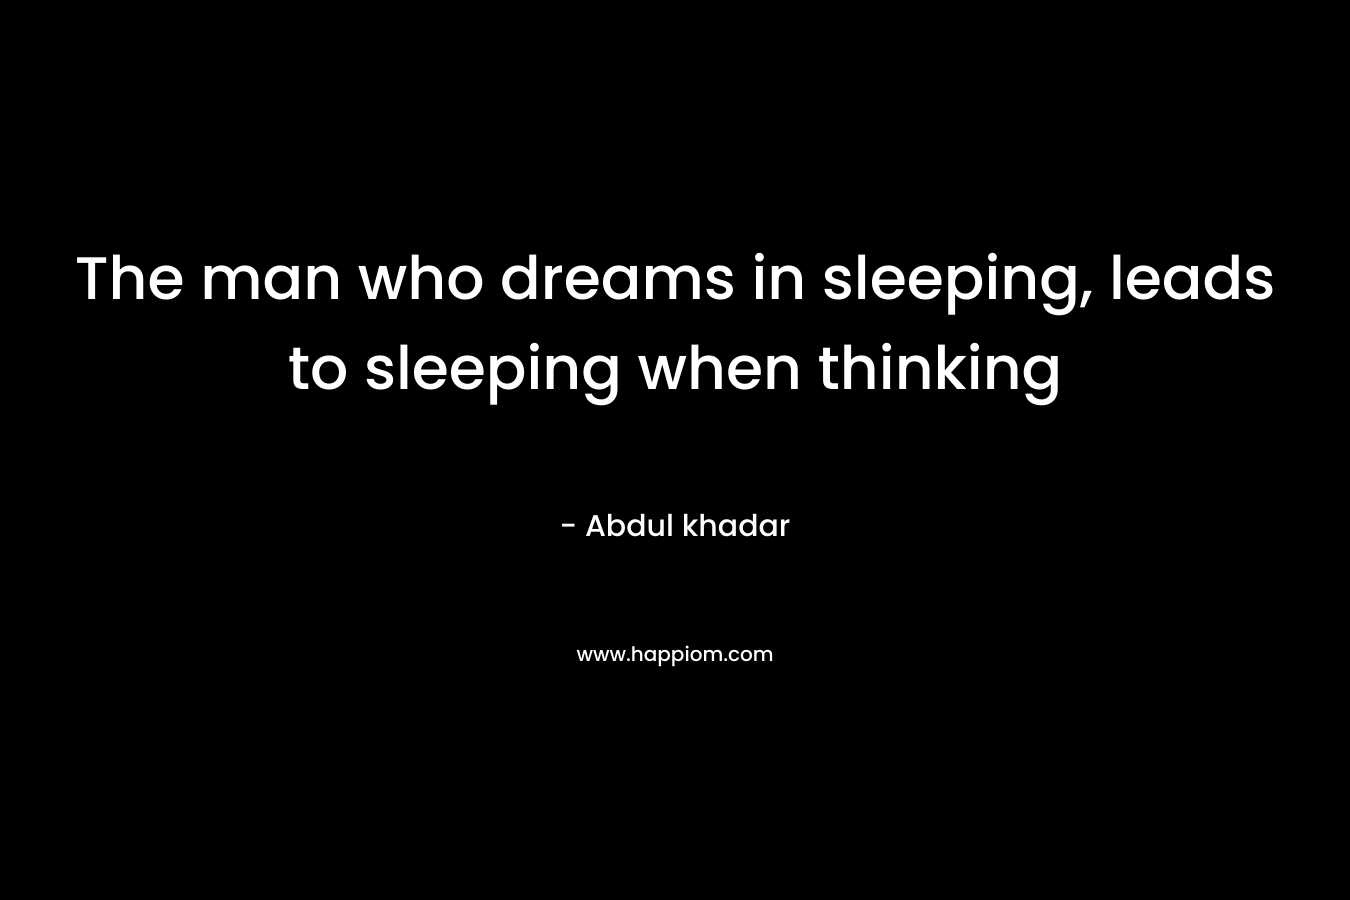 The man who dreams in sleeping, leads to sleeping when thinking